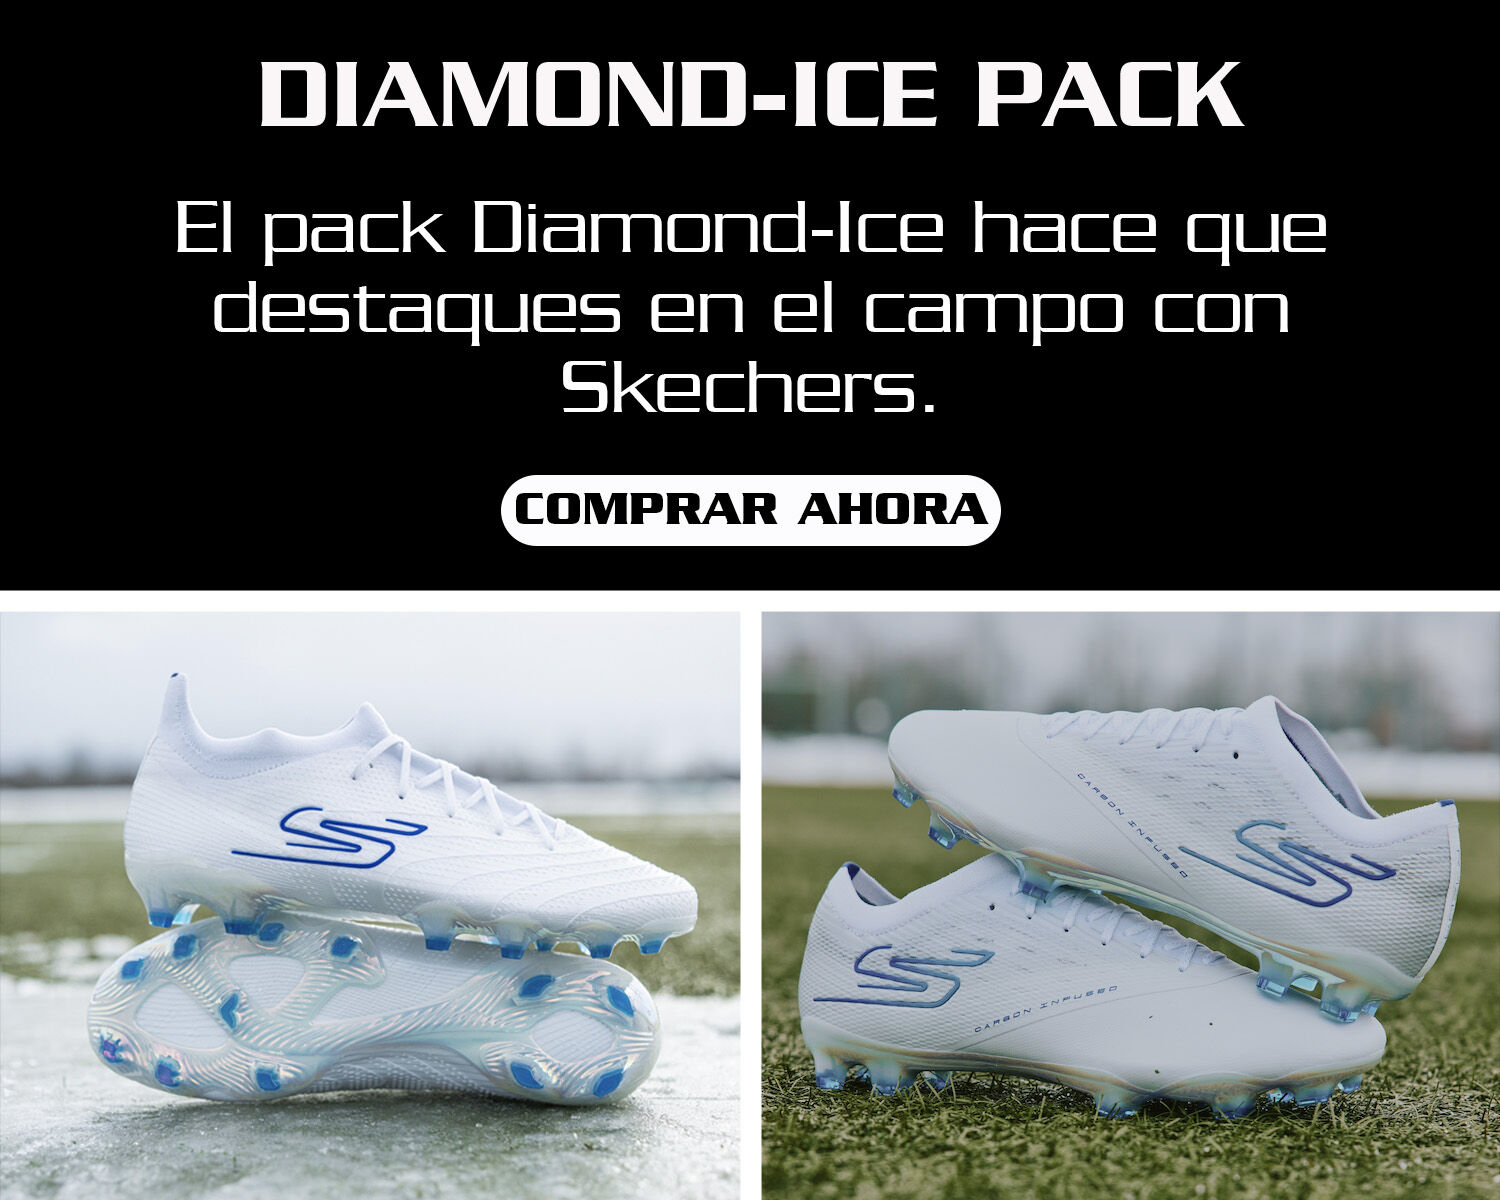 DIAMOND-ICE PACK. The clean, all white Diamond-Ice pack, make you stand out on the pitch in Skechers